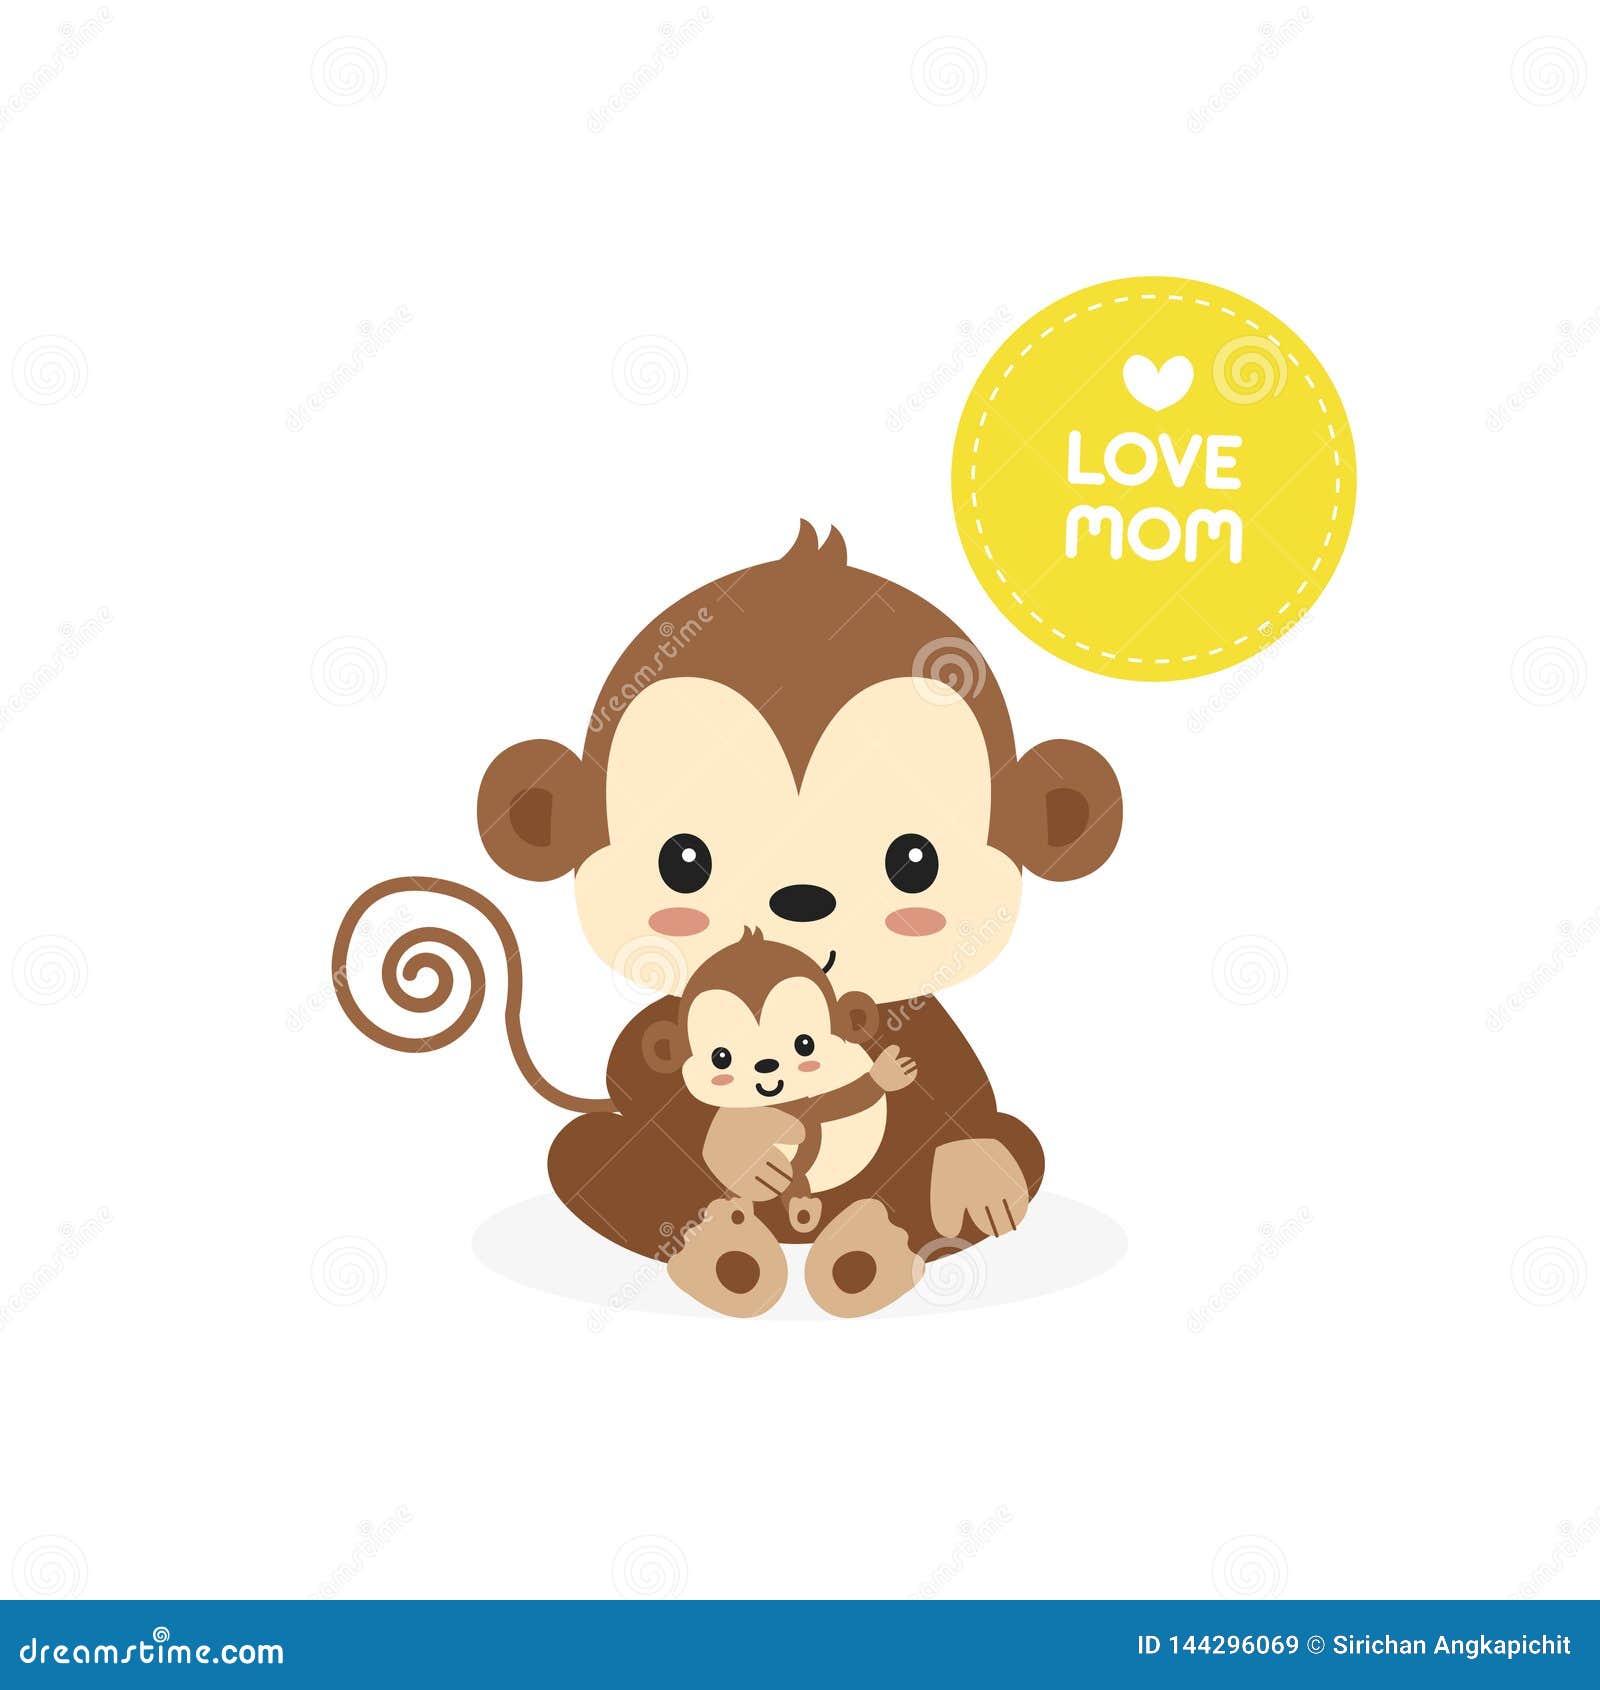 Illustration Of Mom And Baby Monkey Cartoon For Mother S Day Greeting Card Stock Vector Illustration Of Child Cartoon